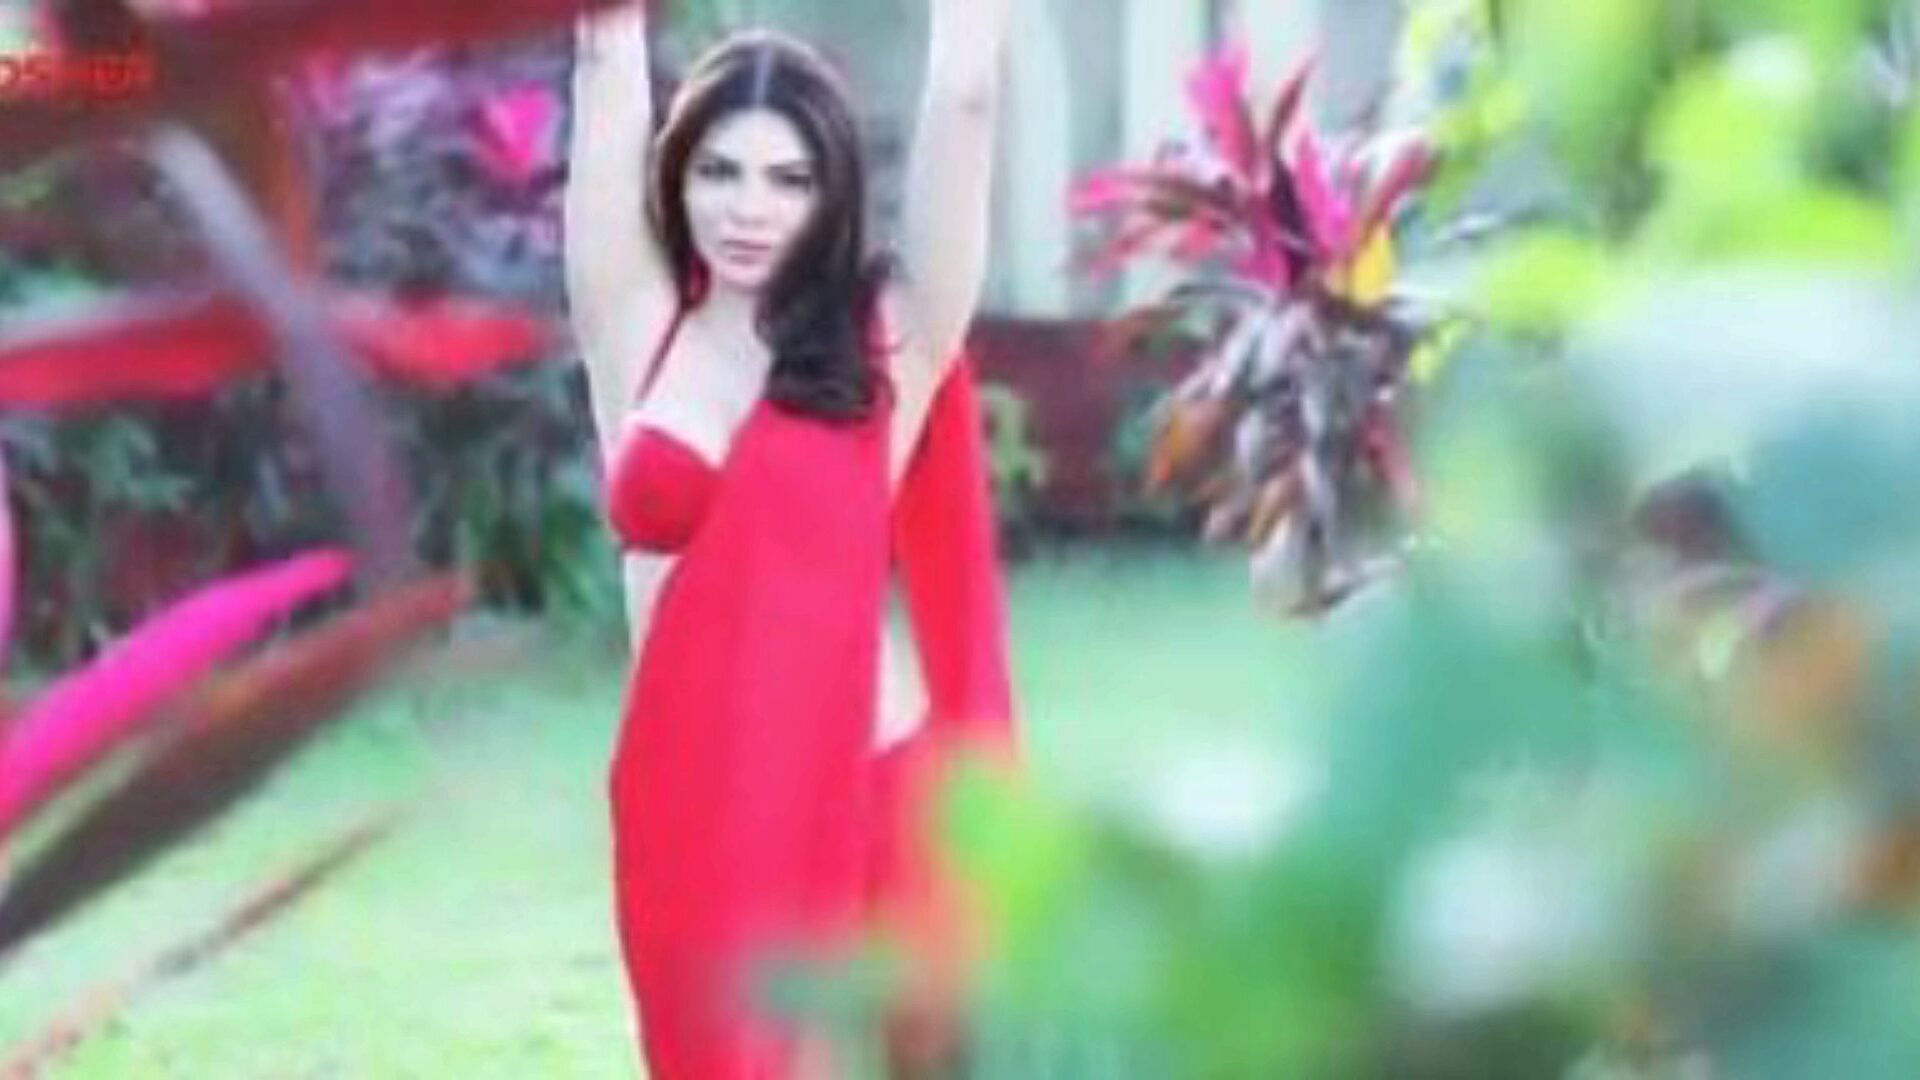 Softly Sherlyn Chopra Latest Hot App Video Redsh: Porn 5c Watch Softly Sherlyn Chopra Latest Hot App Video Redsh movie scene on xHamster - the ultimate selection of free-for-all Indian Xxx Hot Tube hardcore porno tube episodes